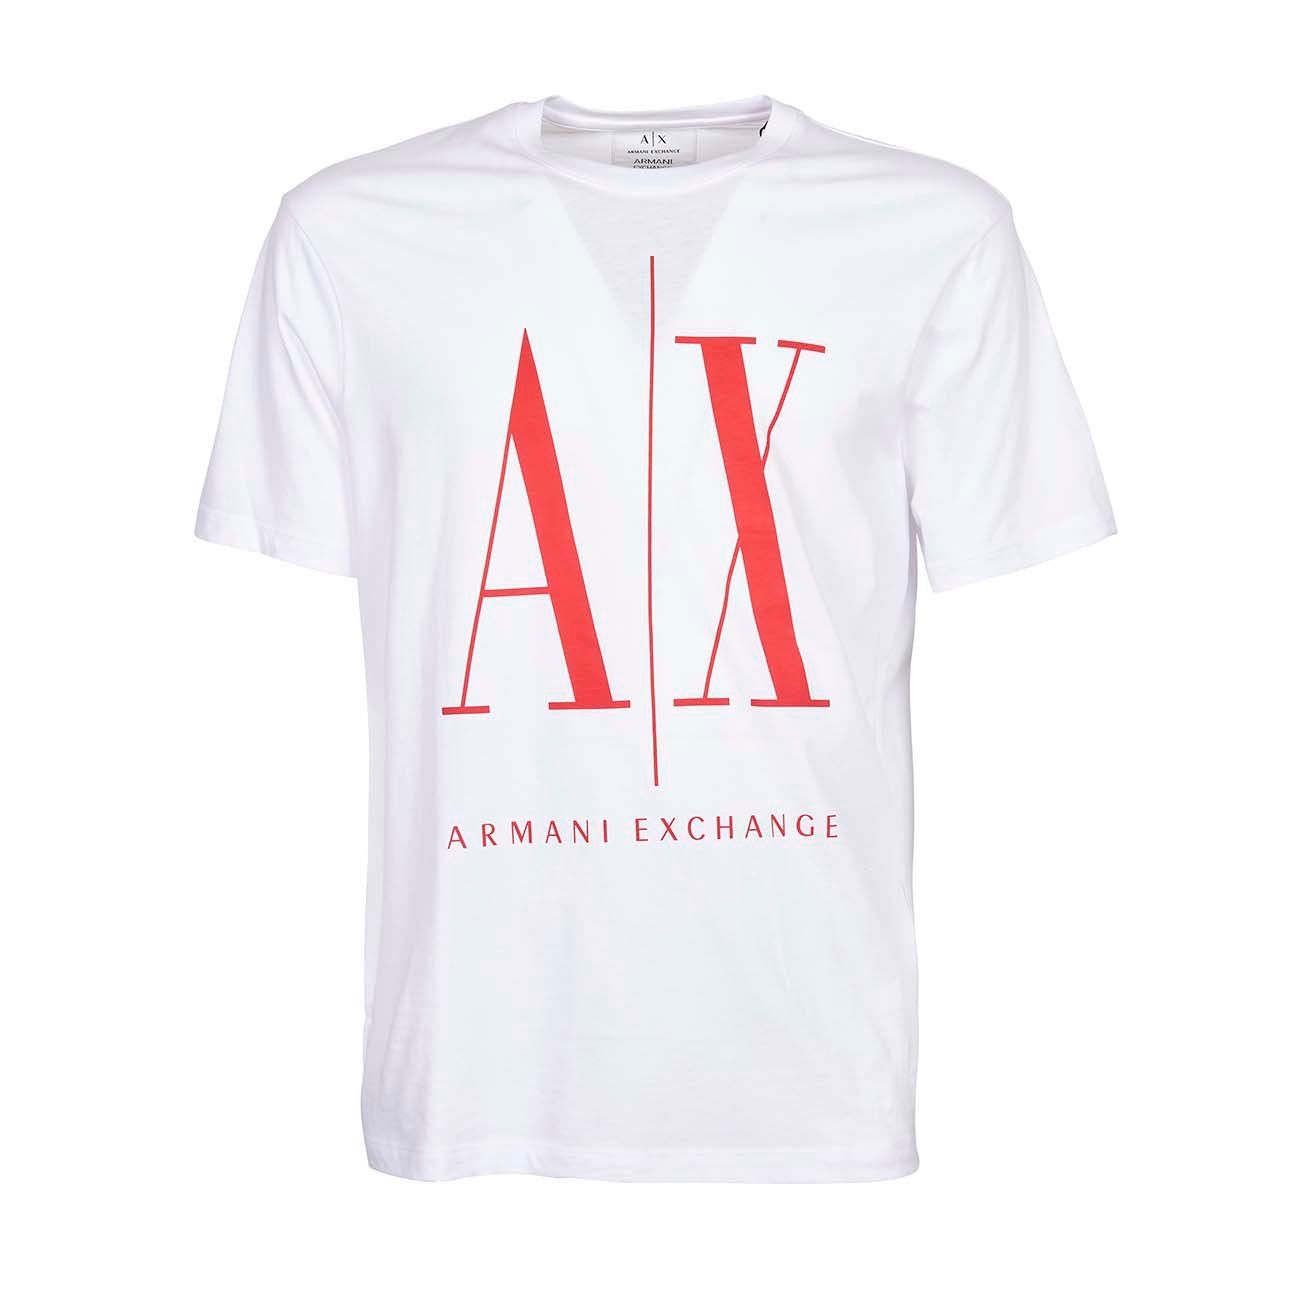 Introducir 51+ imagen red and white armani exchange shirt